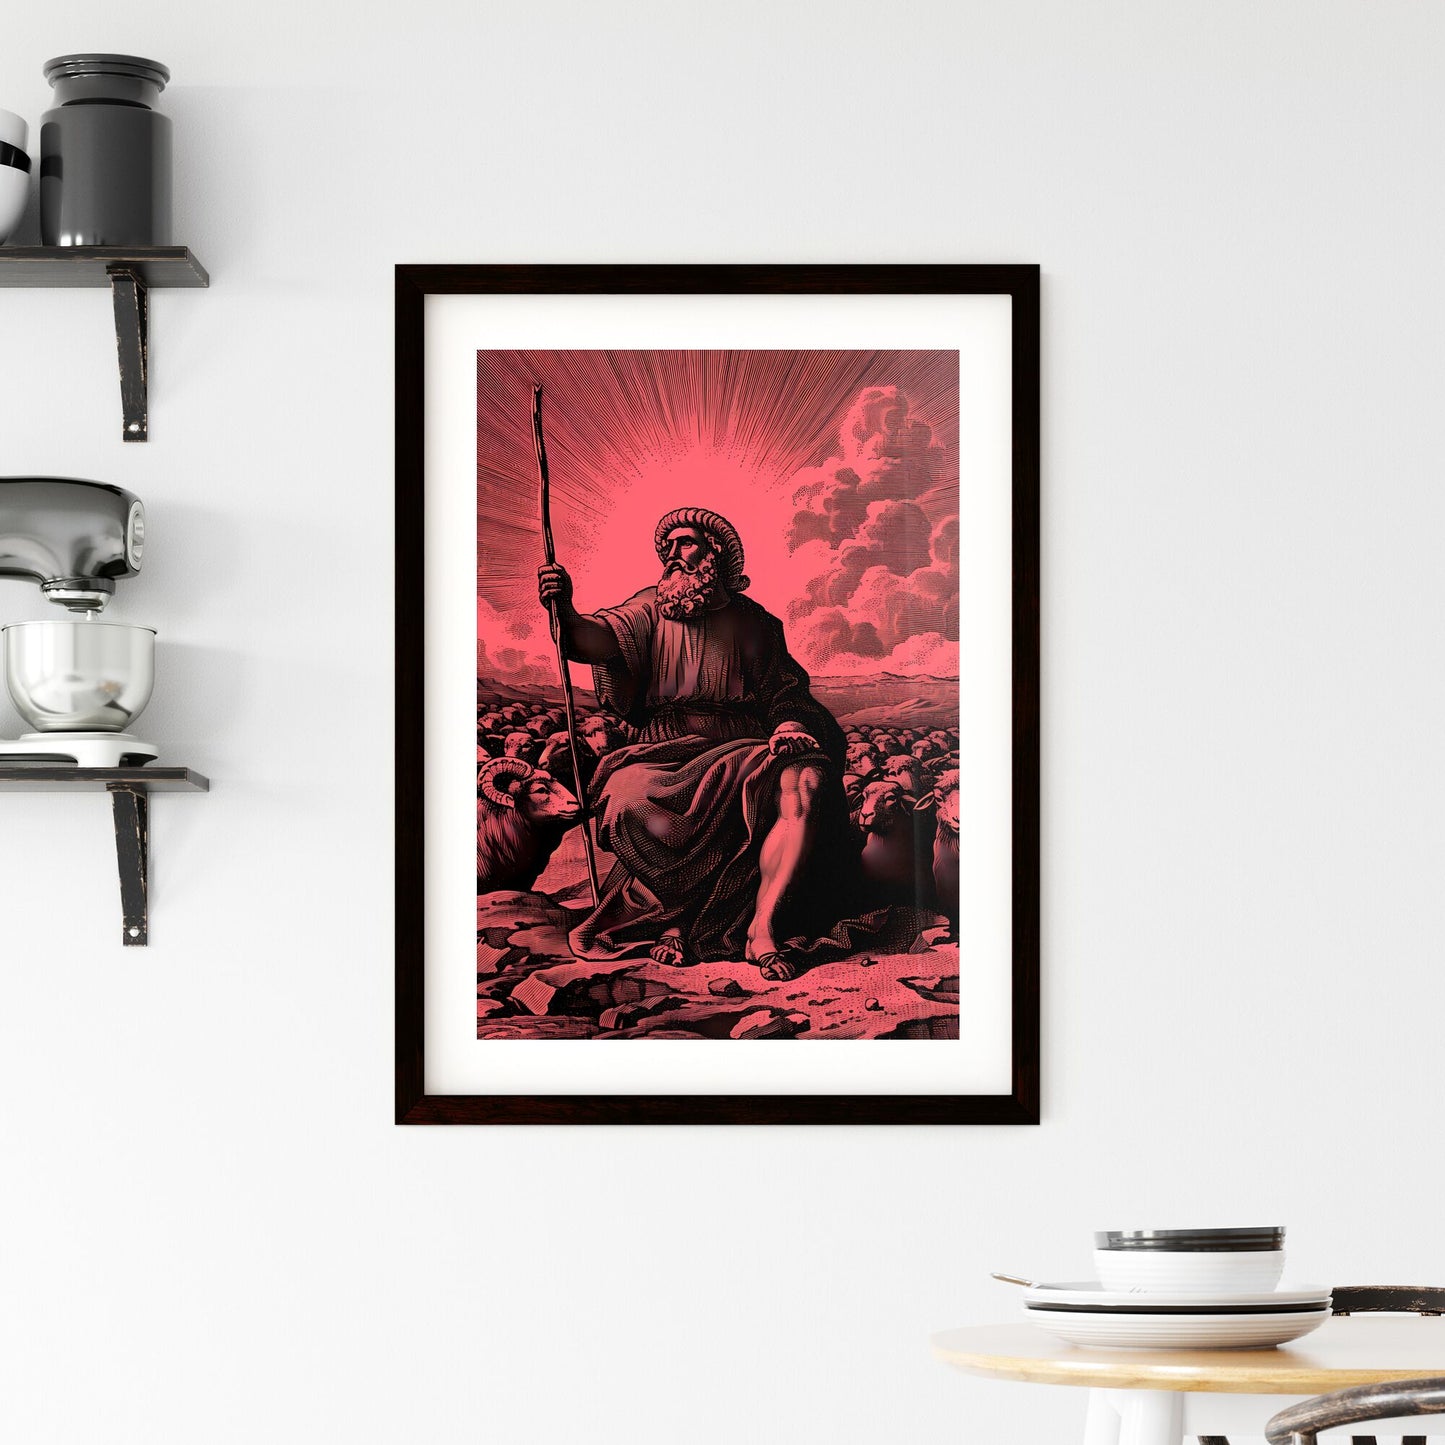 Moses prophet of God herding the flock in the desert, looking up at the sky - Art print of a man with a beard and a staff and sheep Default Title